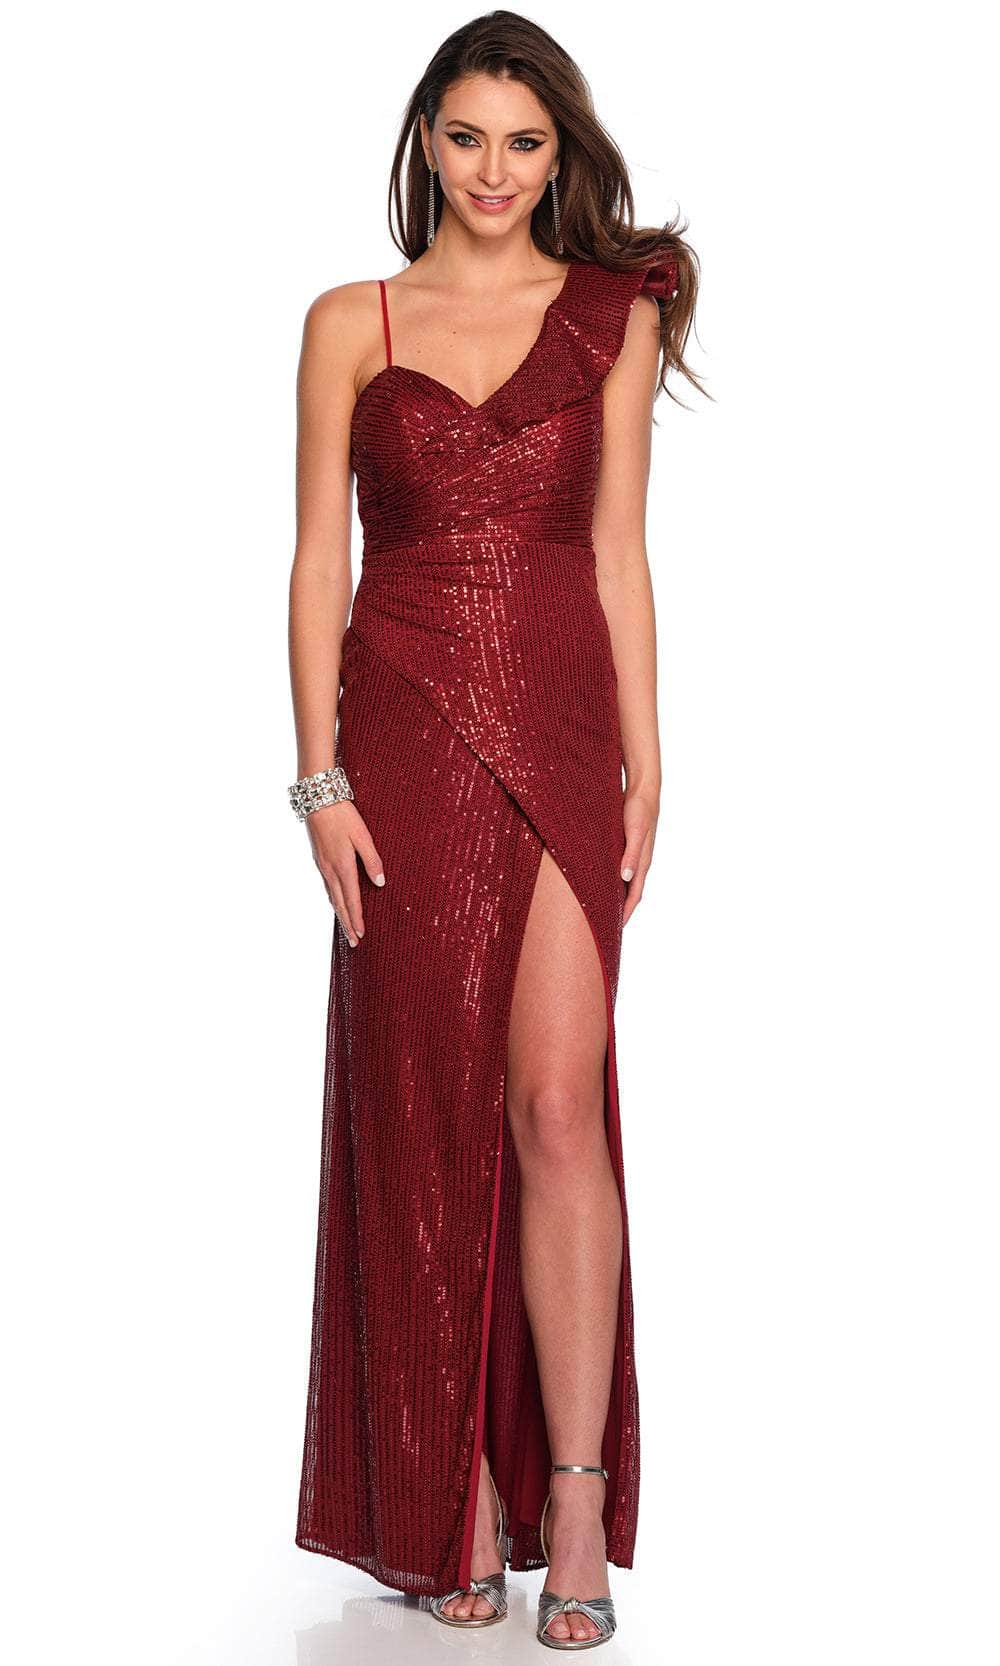 Image of Dave & Johnny 11214 - Ruffled Sleeve Sequin Prom Gown